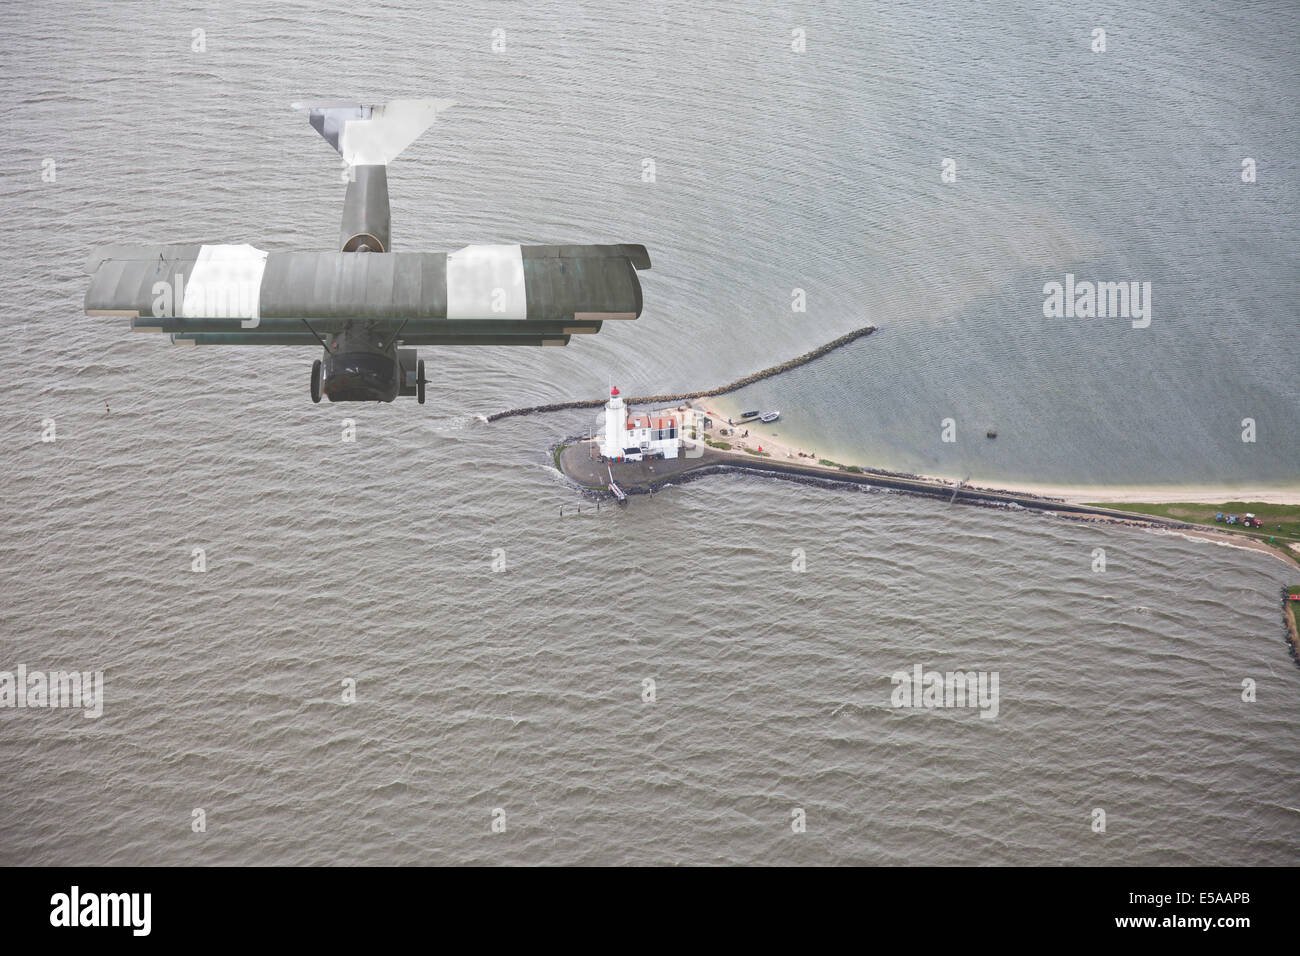 Old airplane flying above water and lighthouse Stock Photo